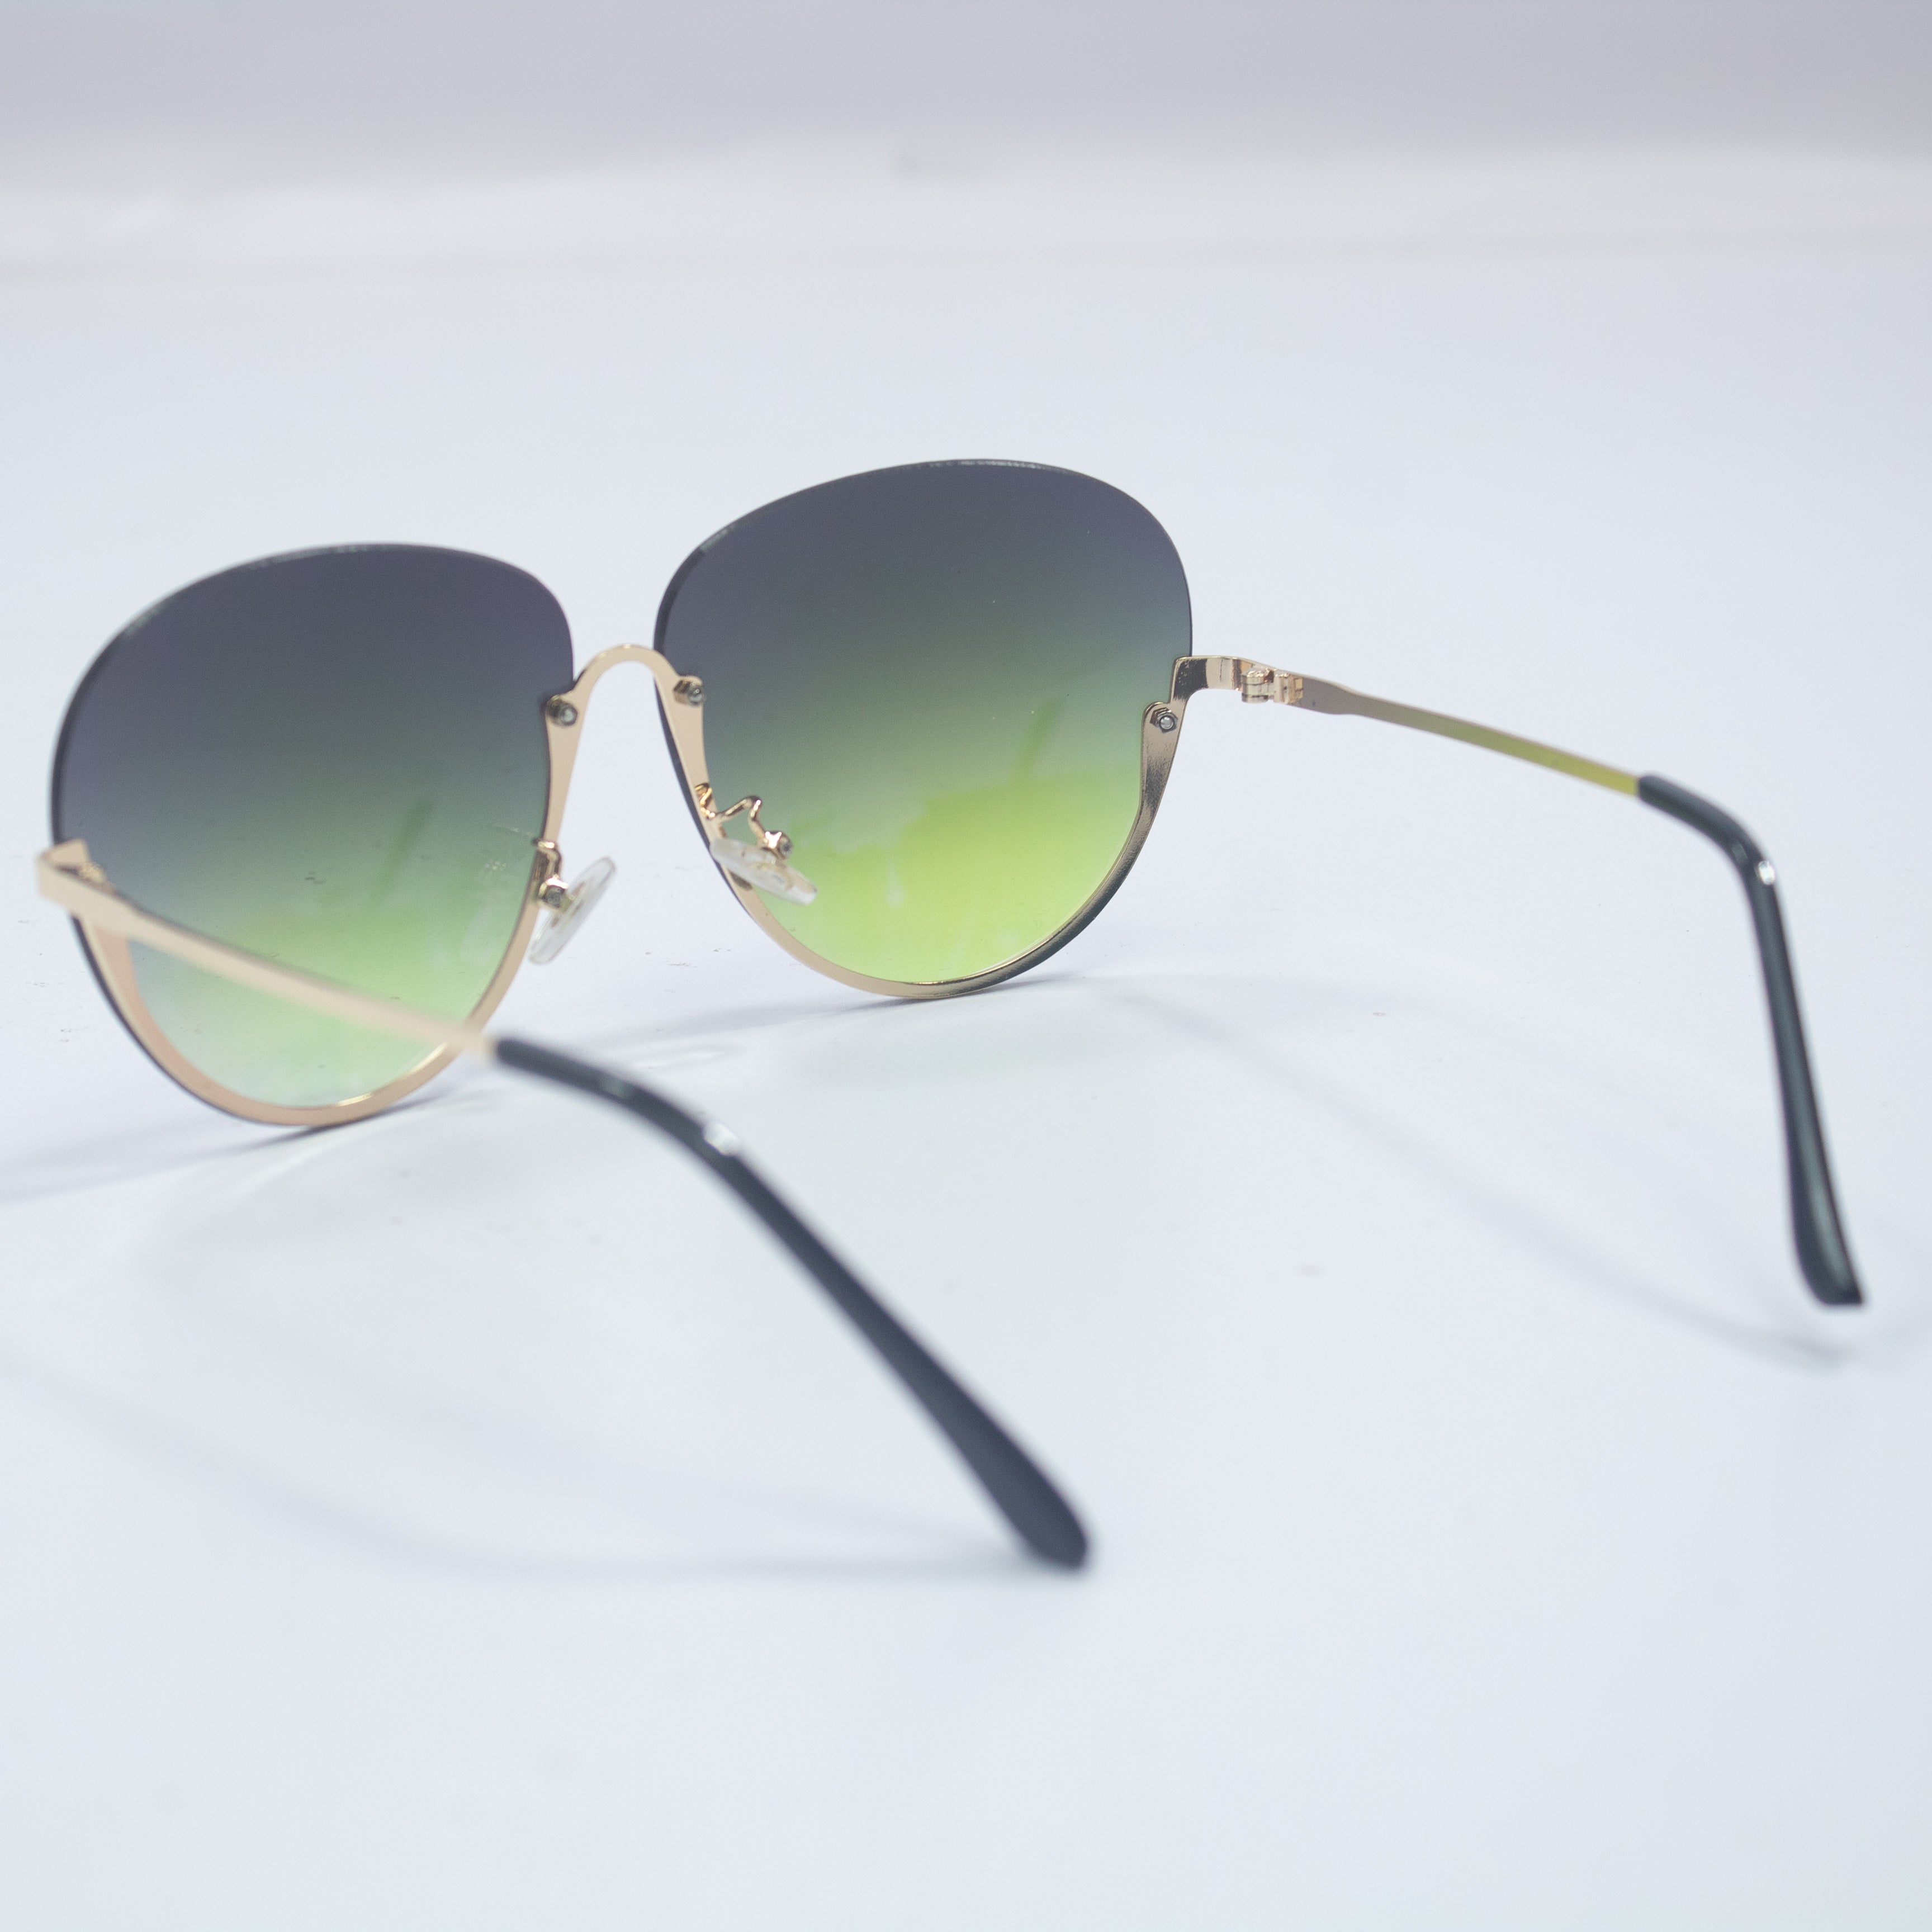 TWO COLORS SUN GLASSES FOR WOMEN